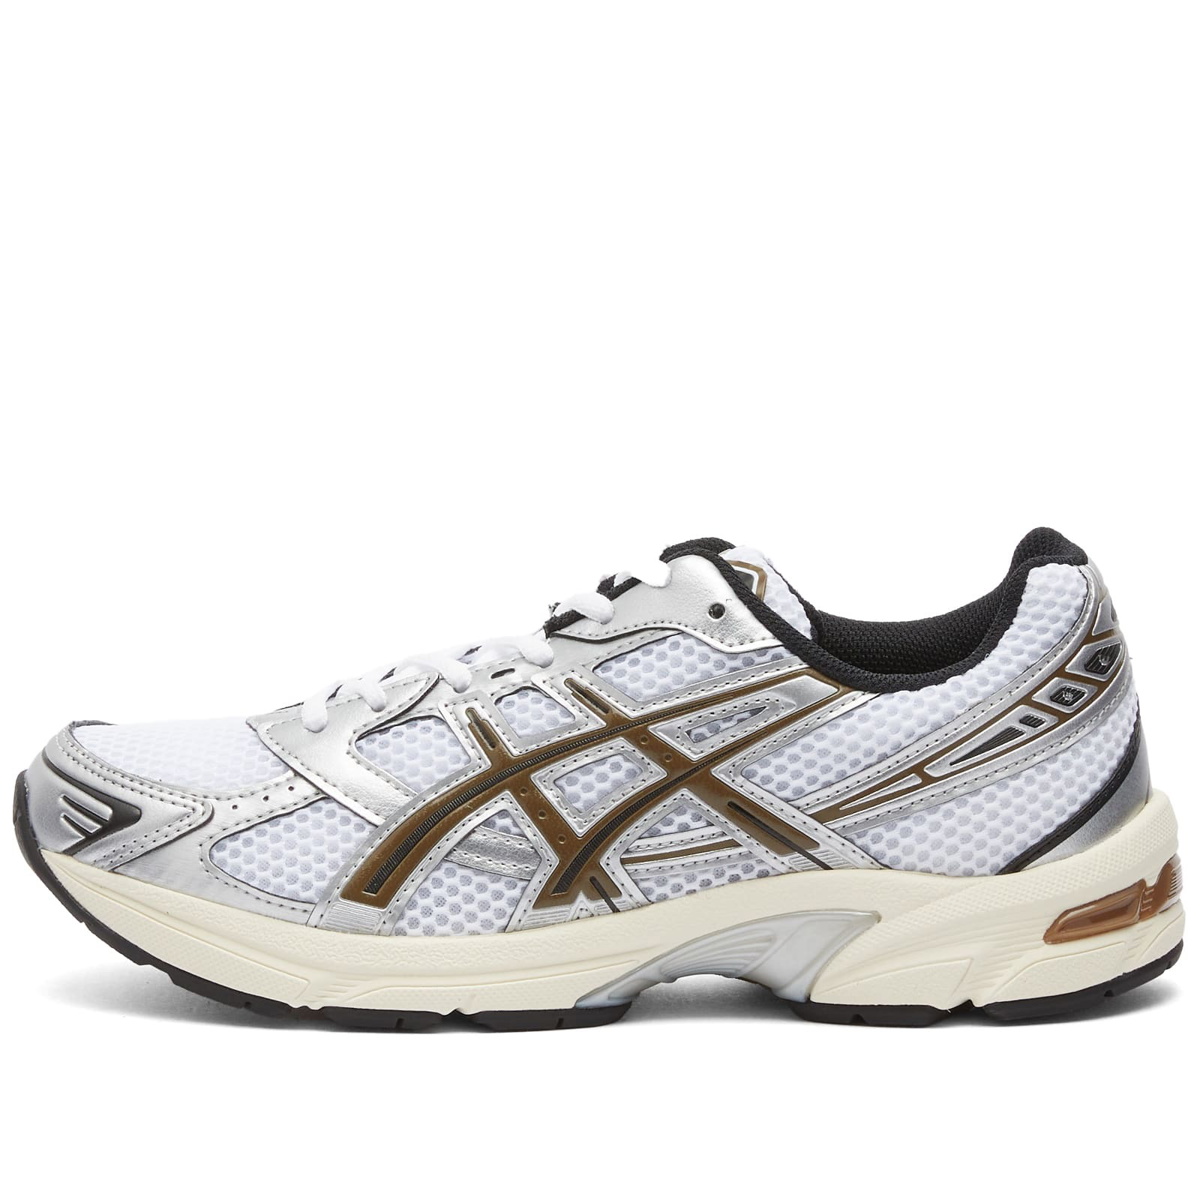 Asics Gel-1130 Sneakers in White/Clay Canyon ASICS